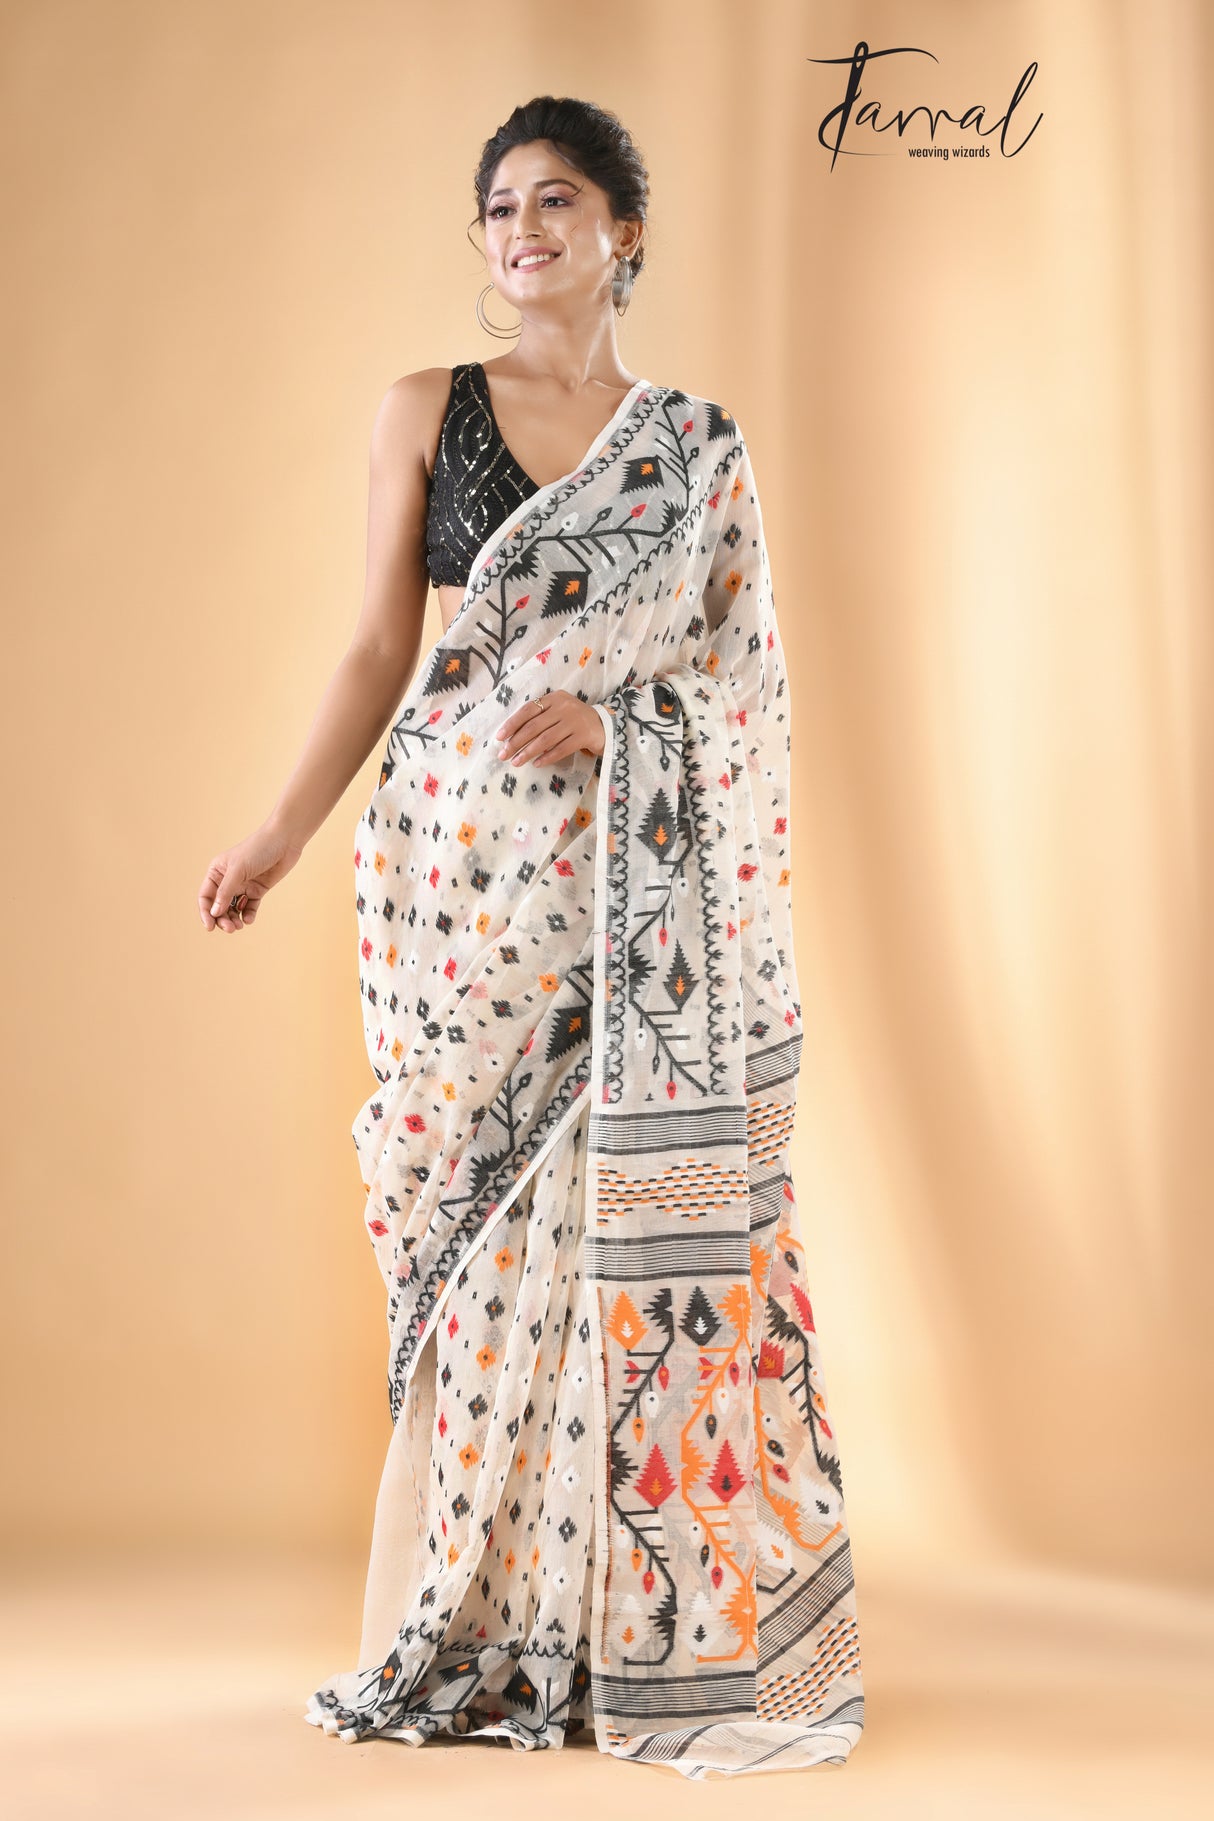 Offwhite with black & other colour soft handloom dhakai jamdani saree with blouse piece